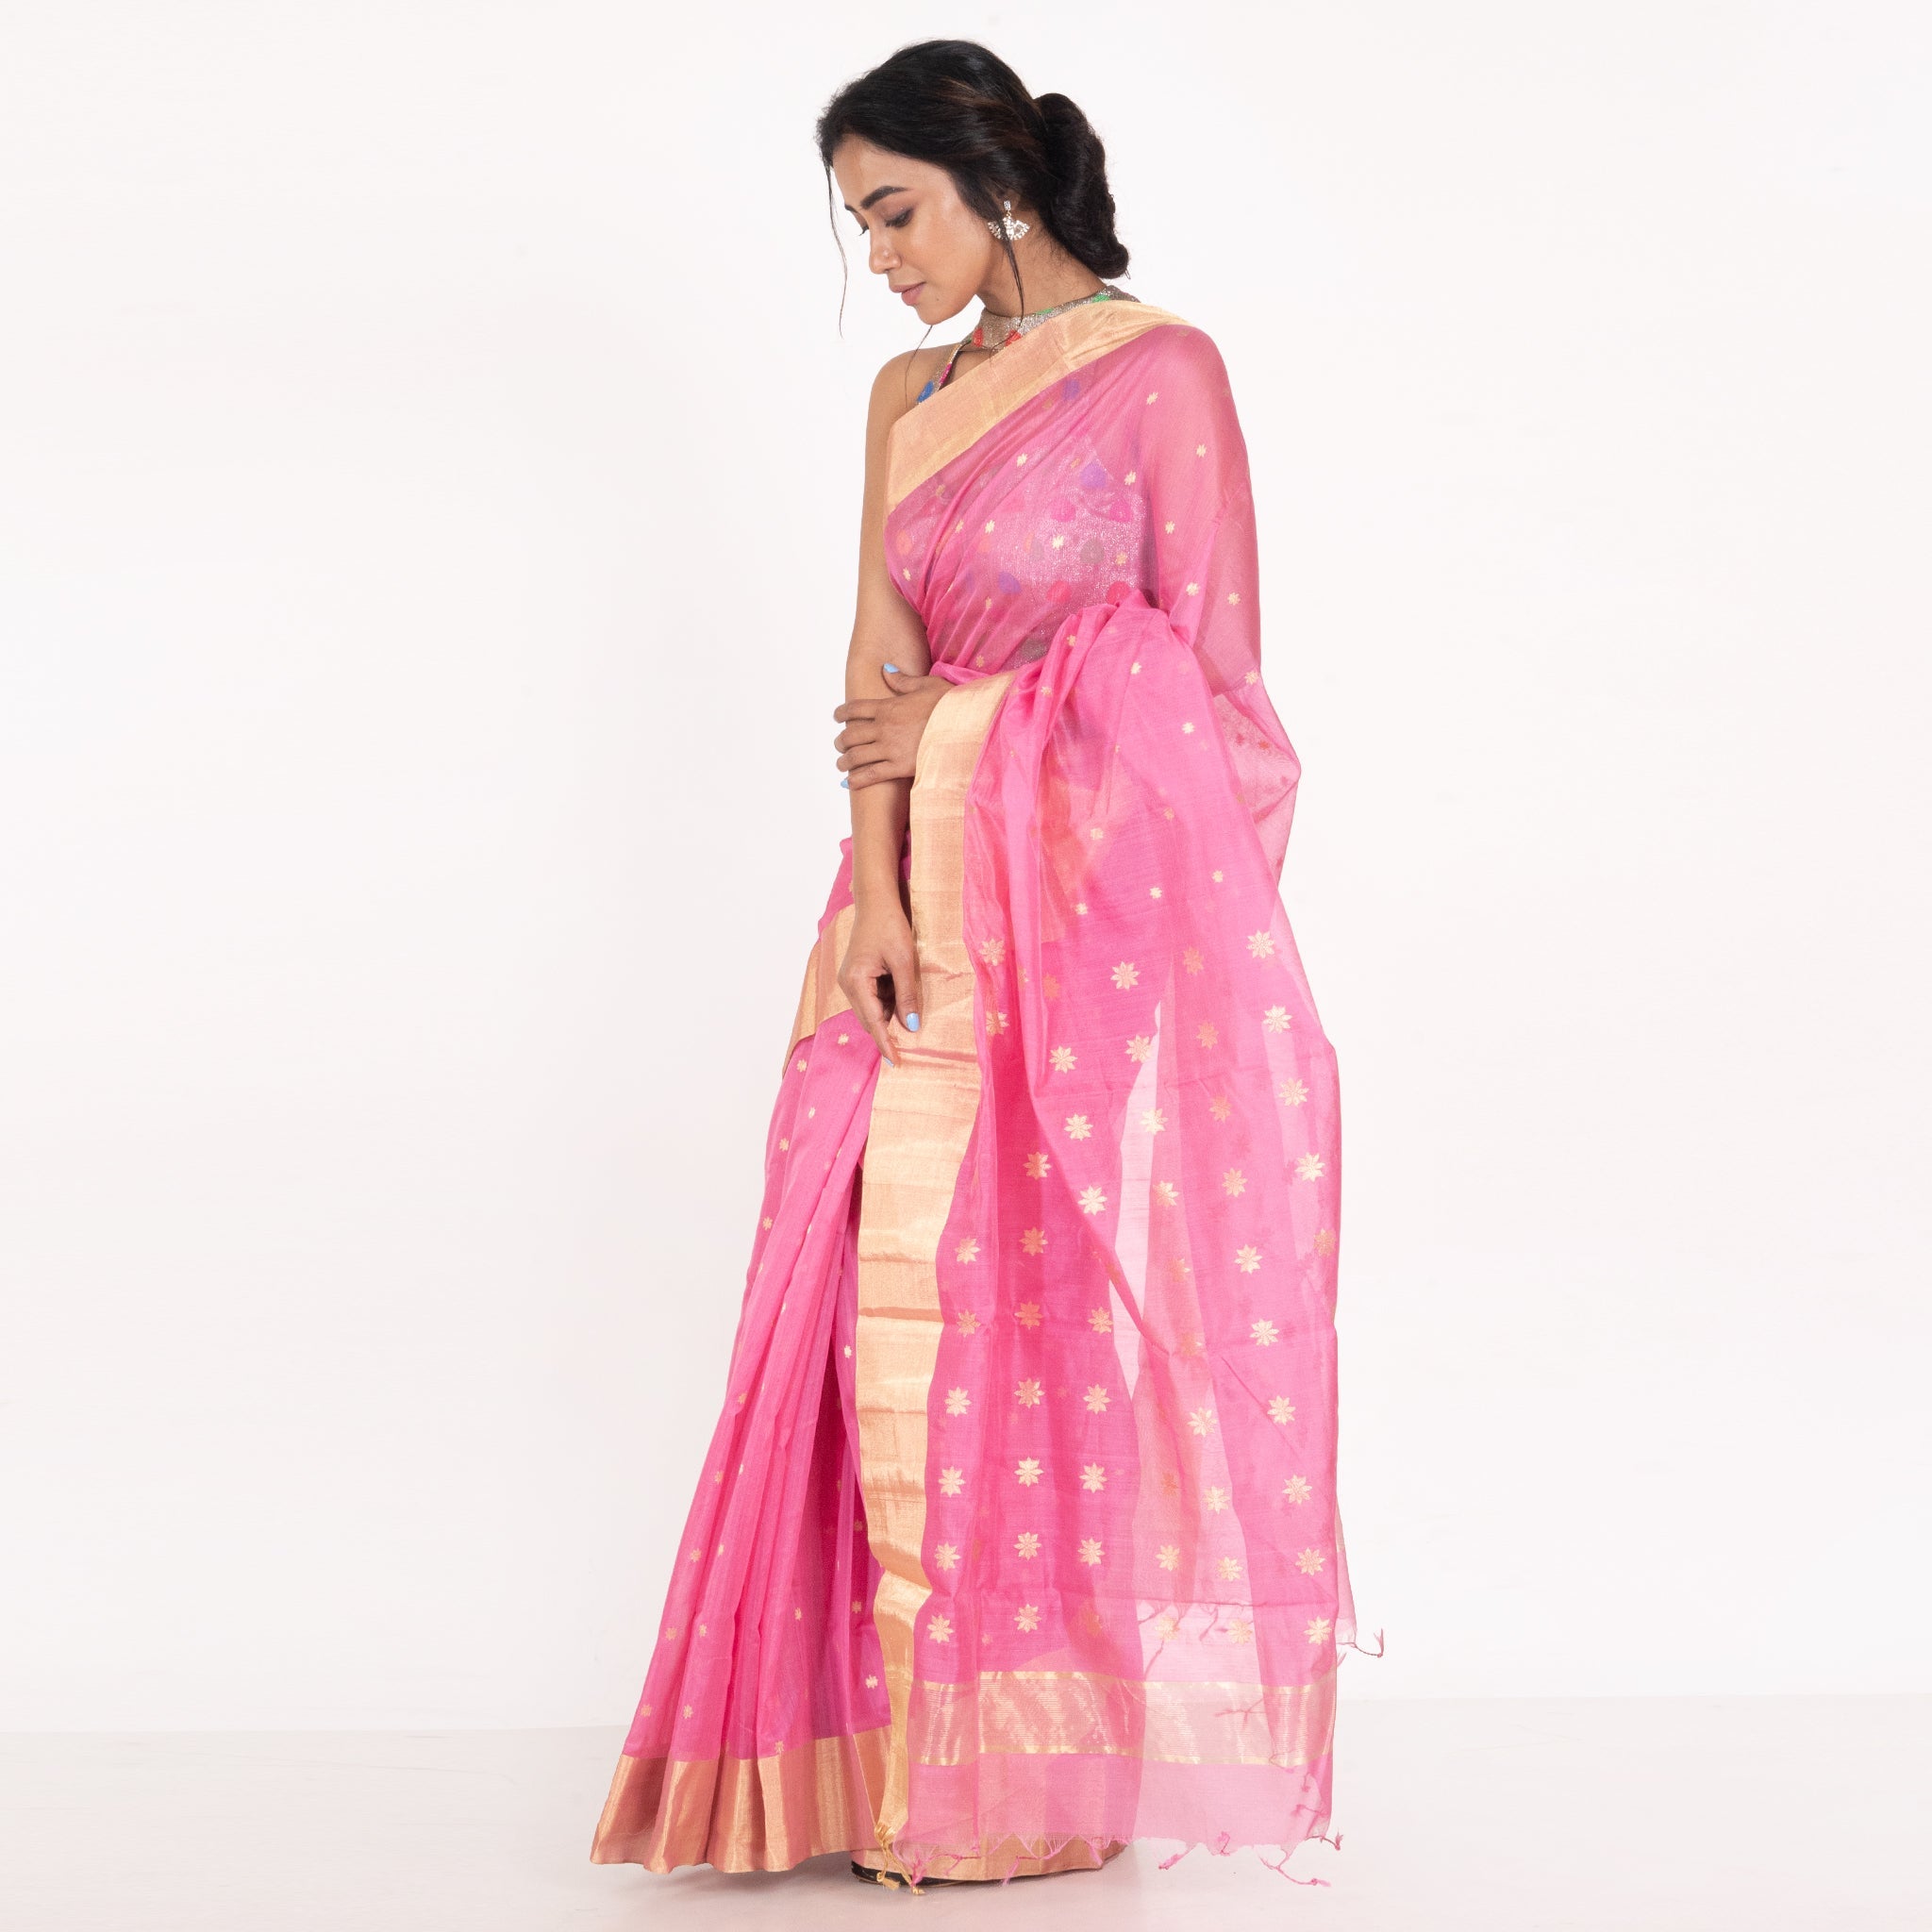 Women's Coral Pink Pure Chanderi Silk Saree With Contrasting Border And Booti - Boveee